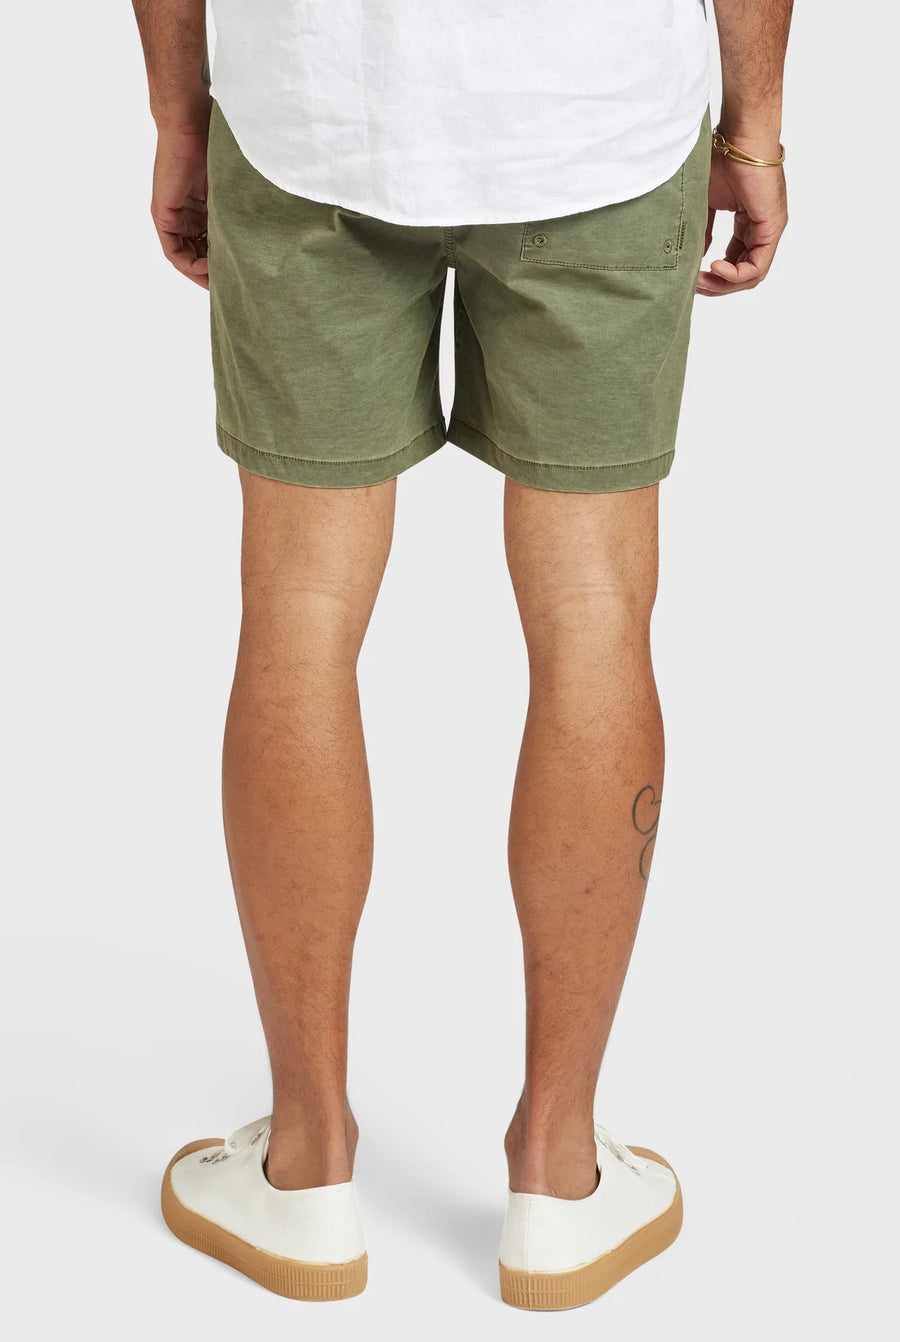 The Academy Brand Teamster Boardy - Washed Khaki